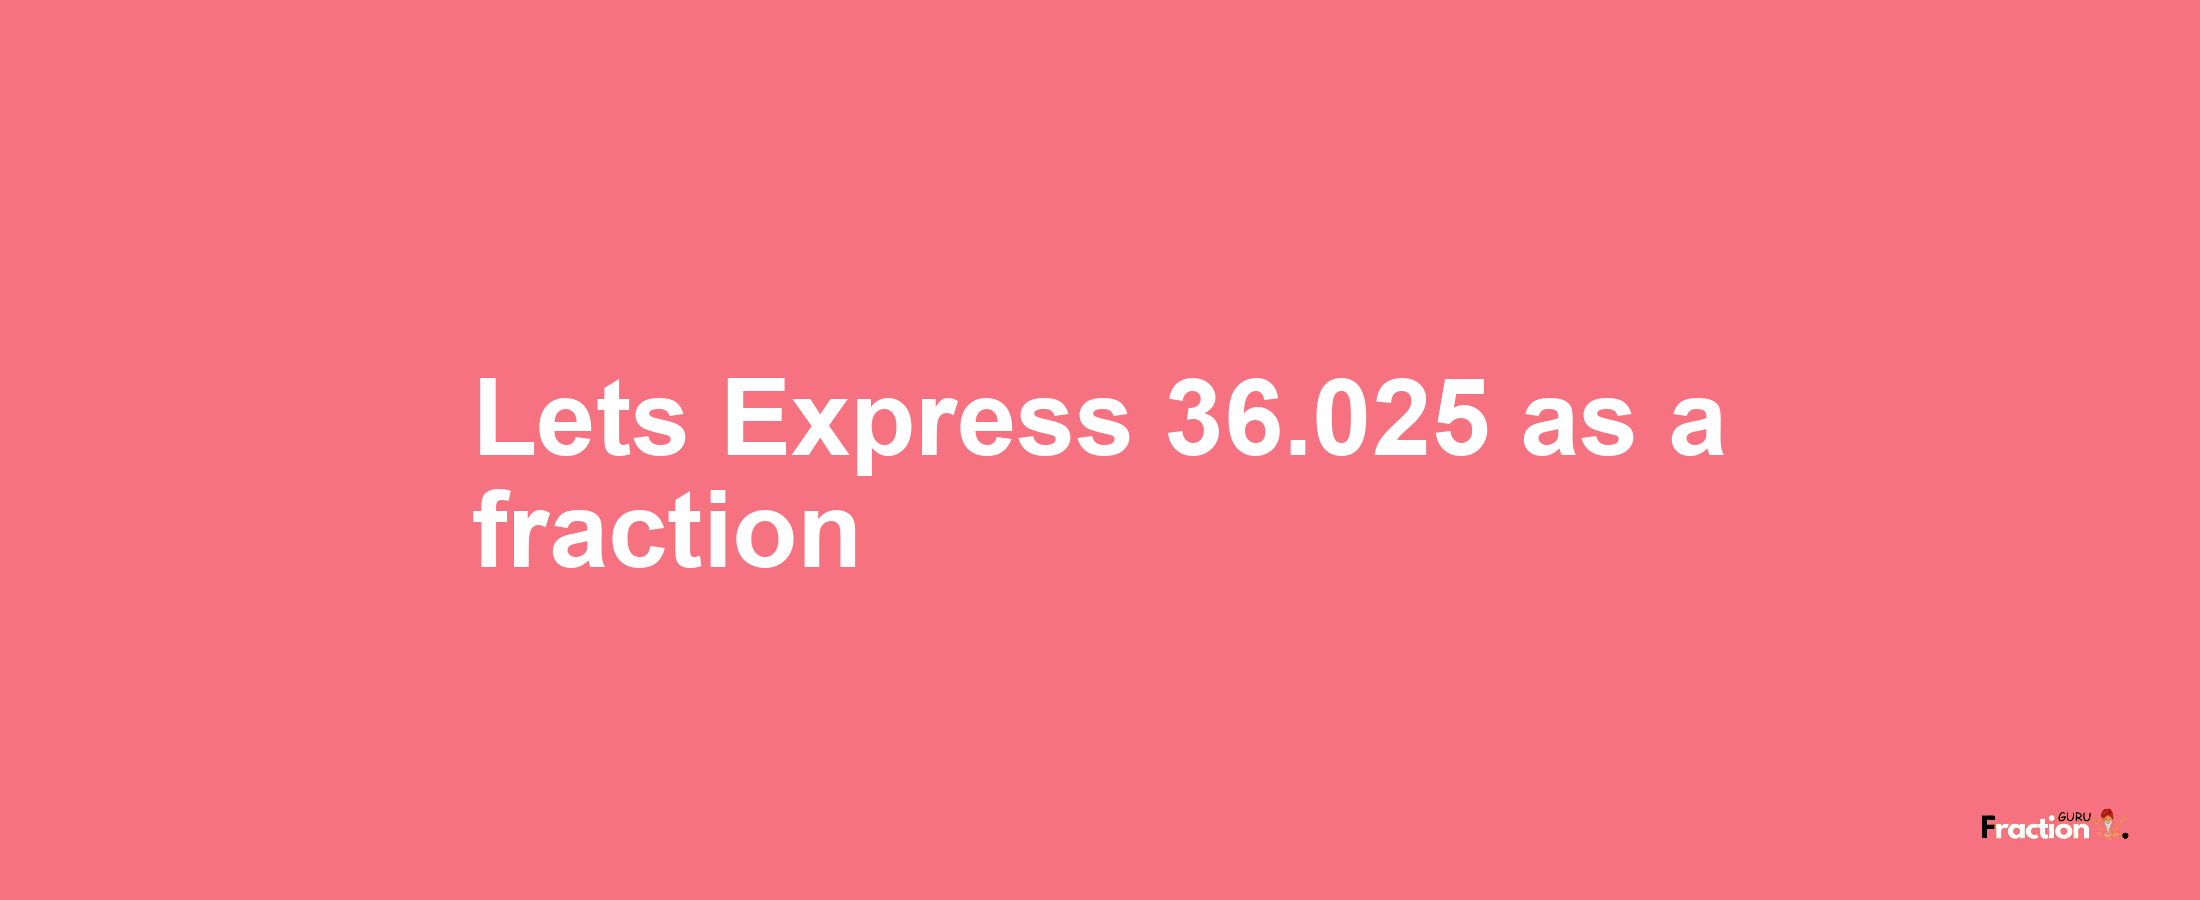 Lets Express 36.025 as afraction